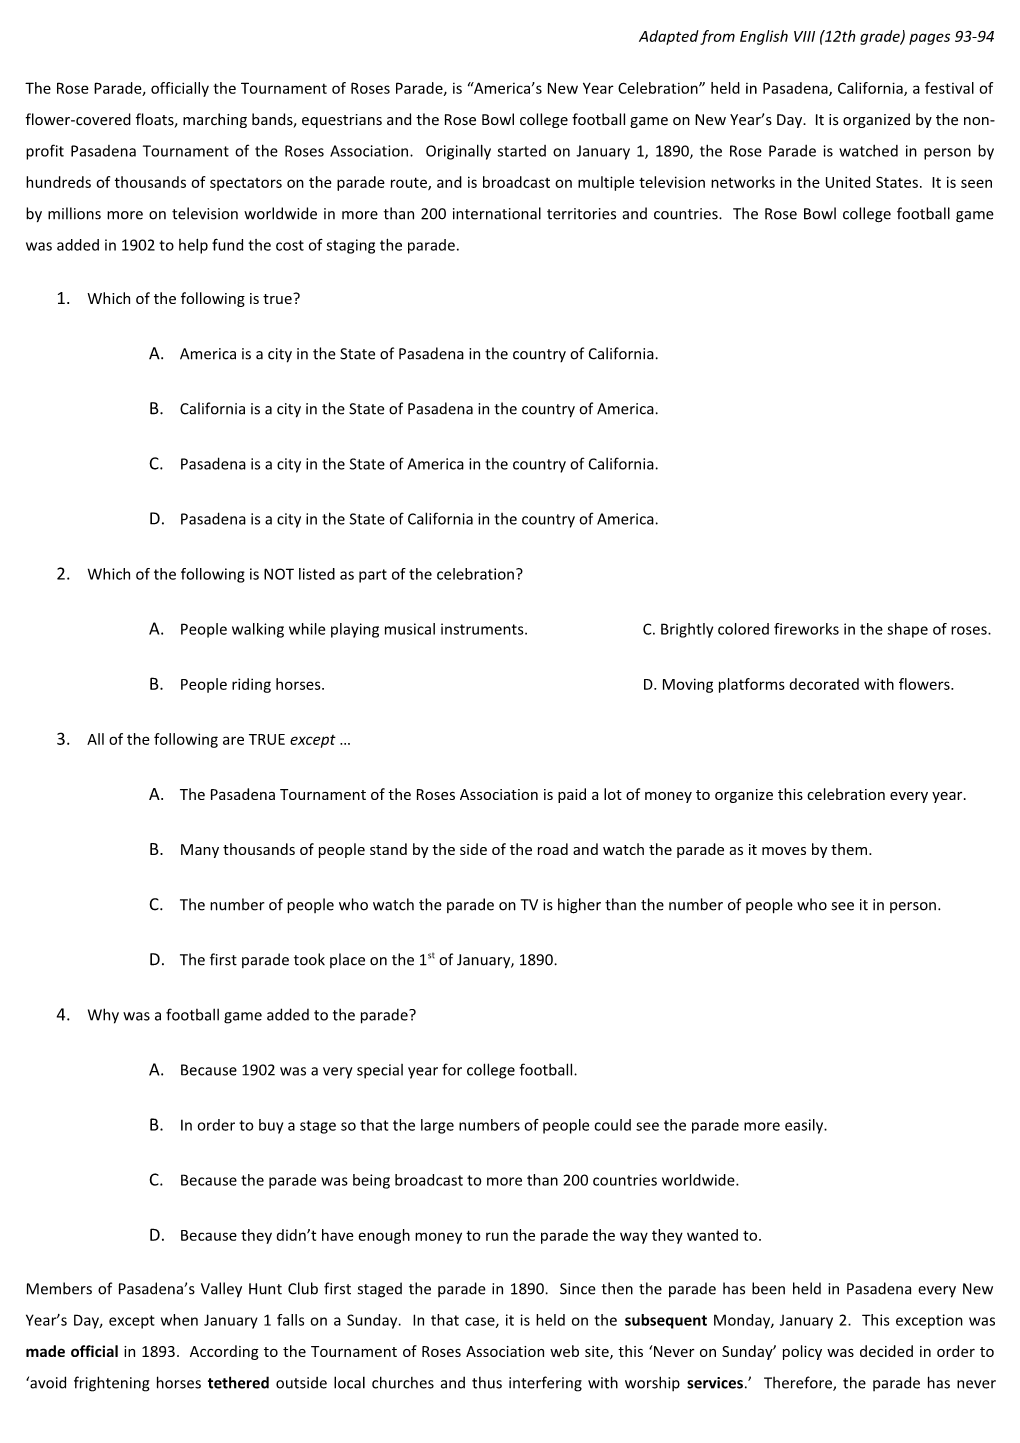 Adapted from English VIII (12Th Grade) Pages 93-94